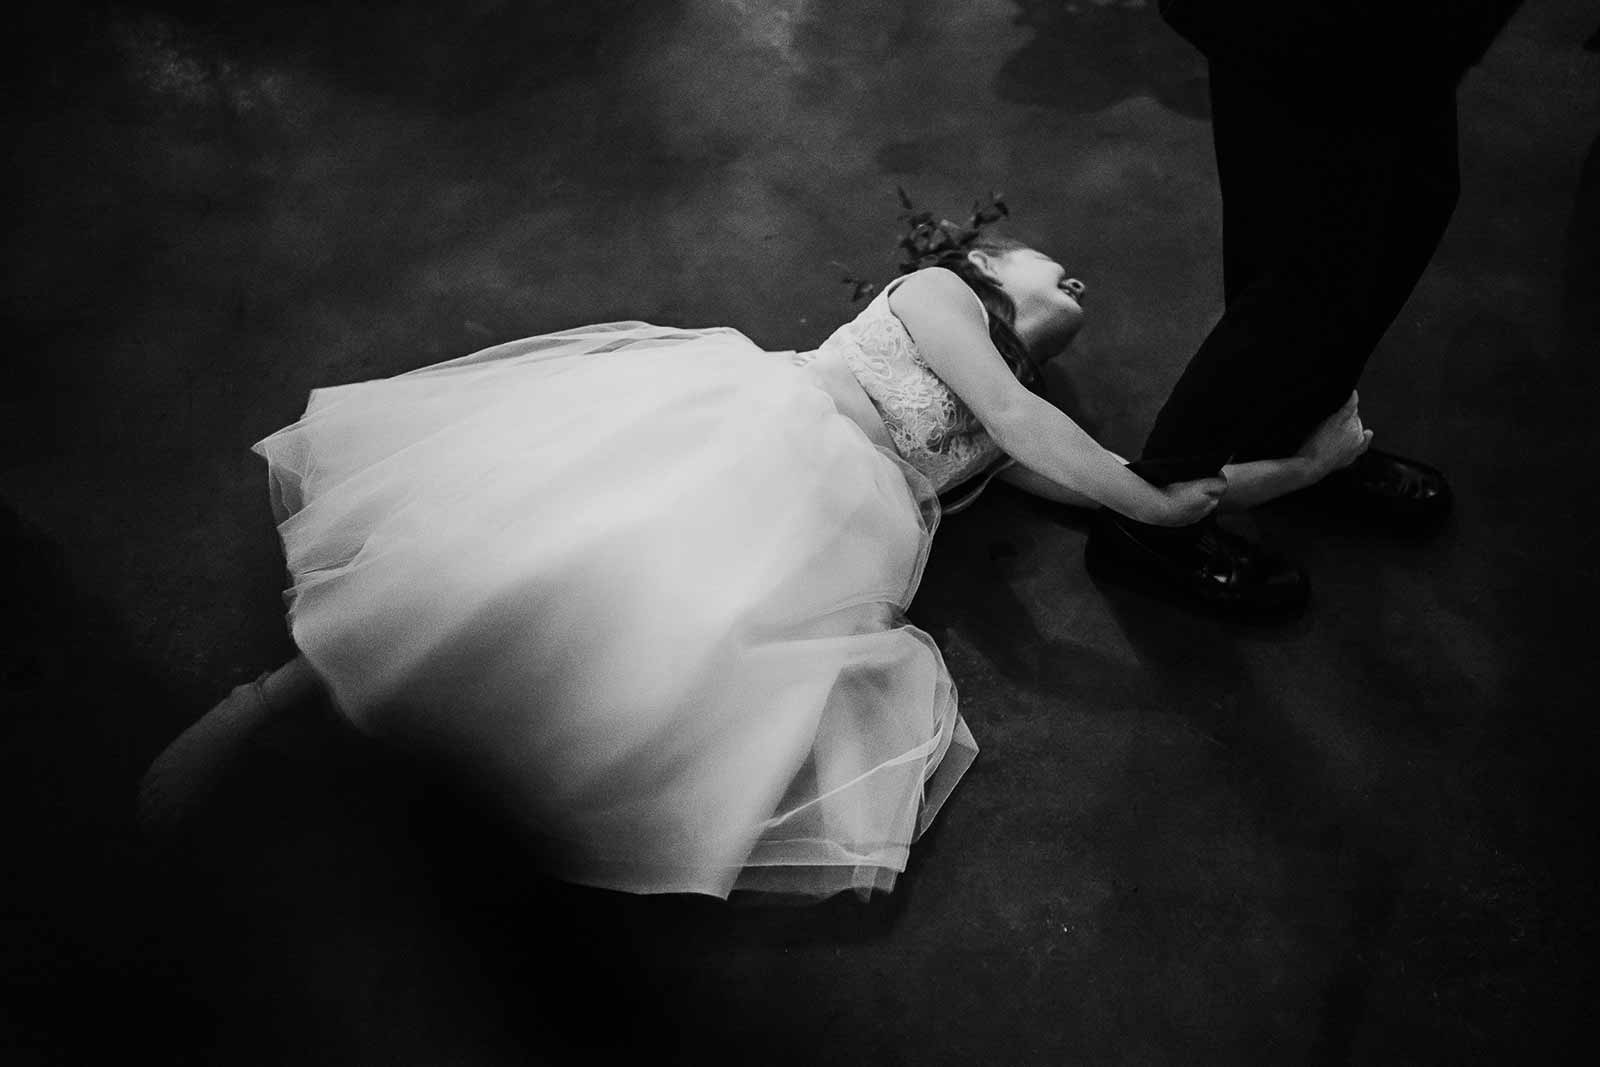 A flower girl hangs on to a boys ankle as she's dragged across the wedding reception dance floor